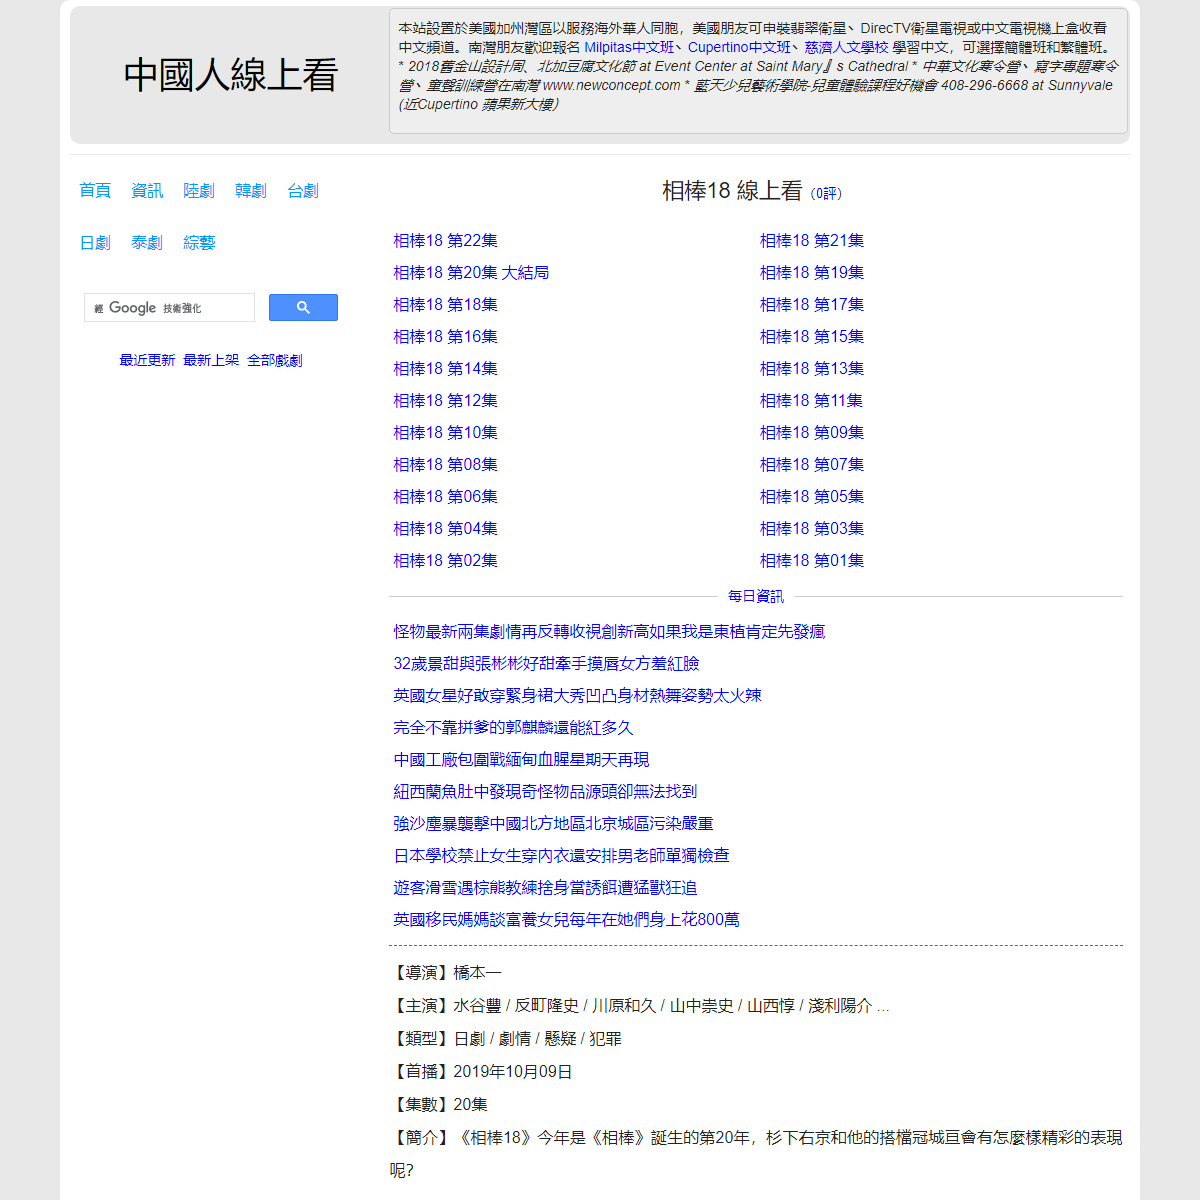 A complete backup of https://chinaq.tv/jp191009b/